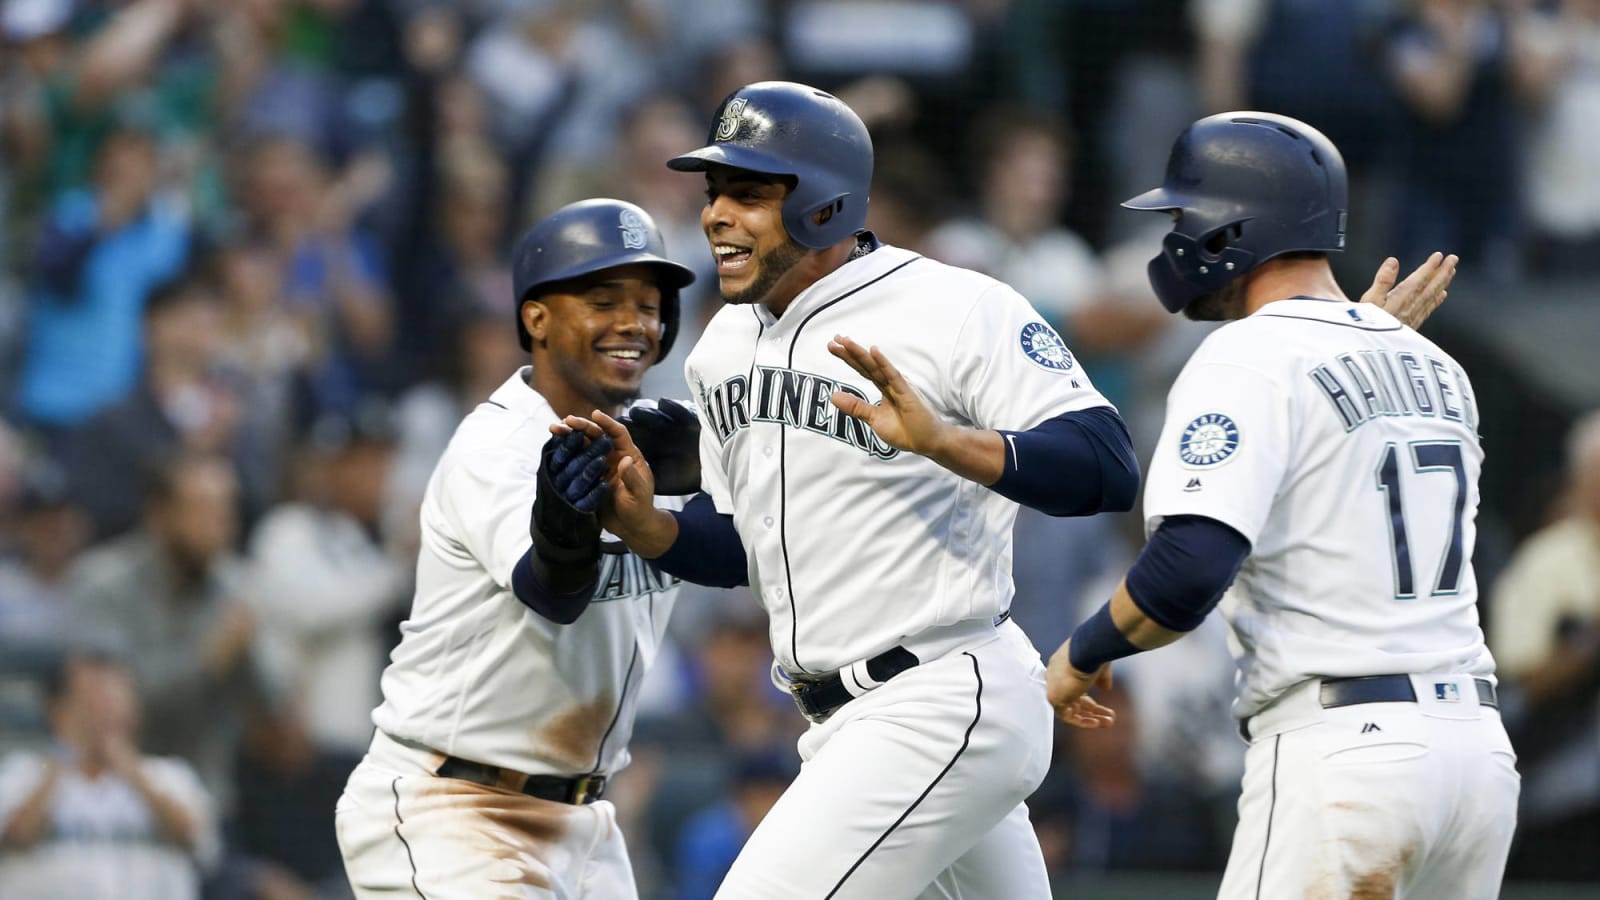 MLB power rankings: Mariners make their case as best of the AL West